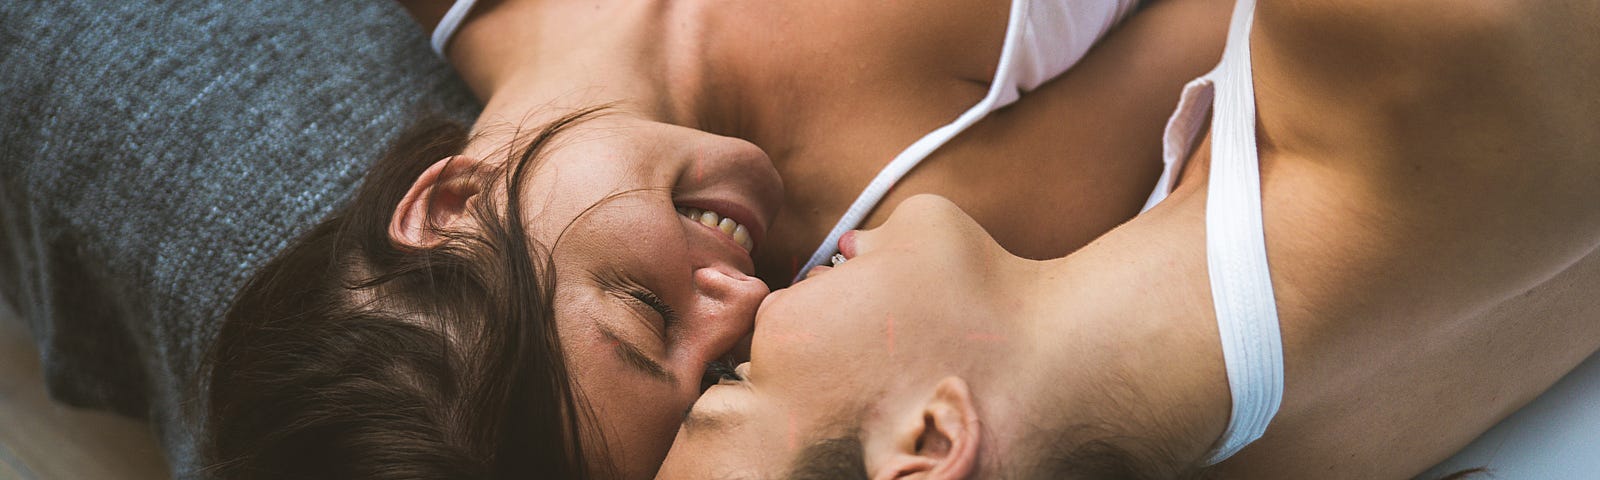 two women in bed for an article about sexual chemistry